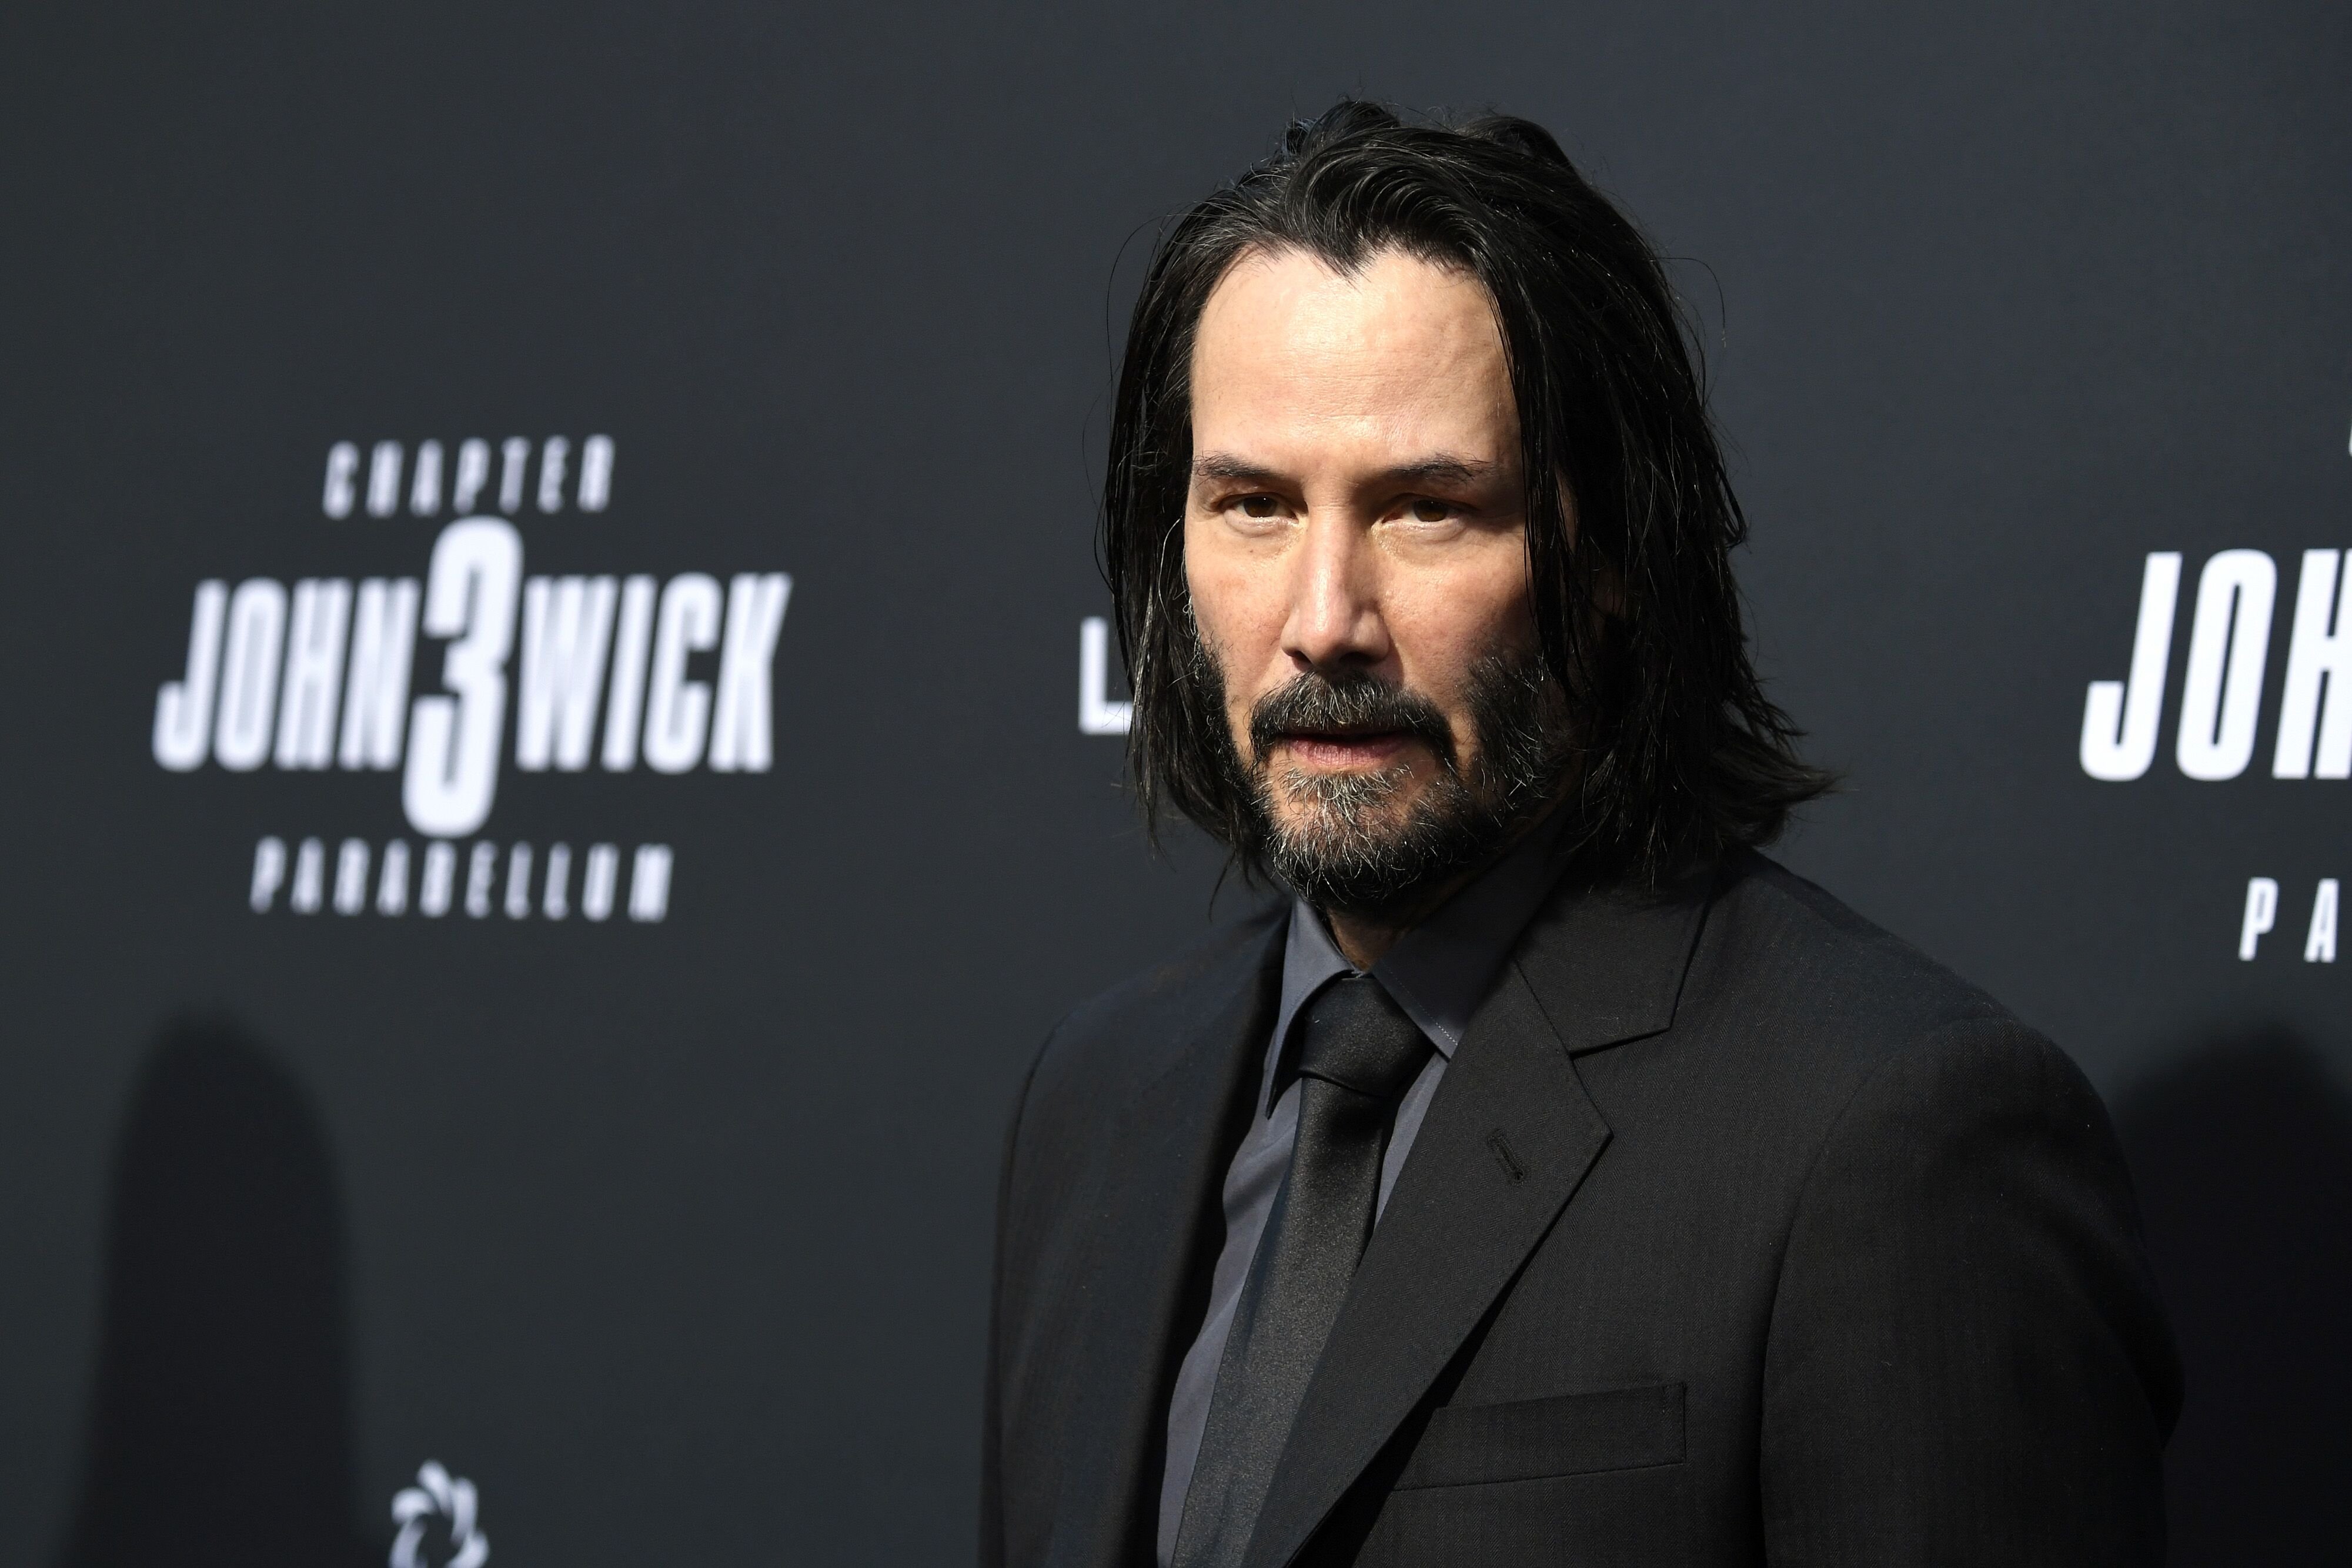 Keanu Reeves attends the special screening of Lionsgate's "John Wick: Chapter 3 - Parabellum." | Source: Getty Images